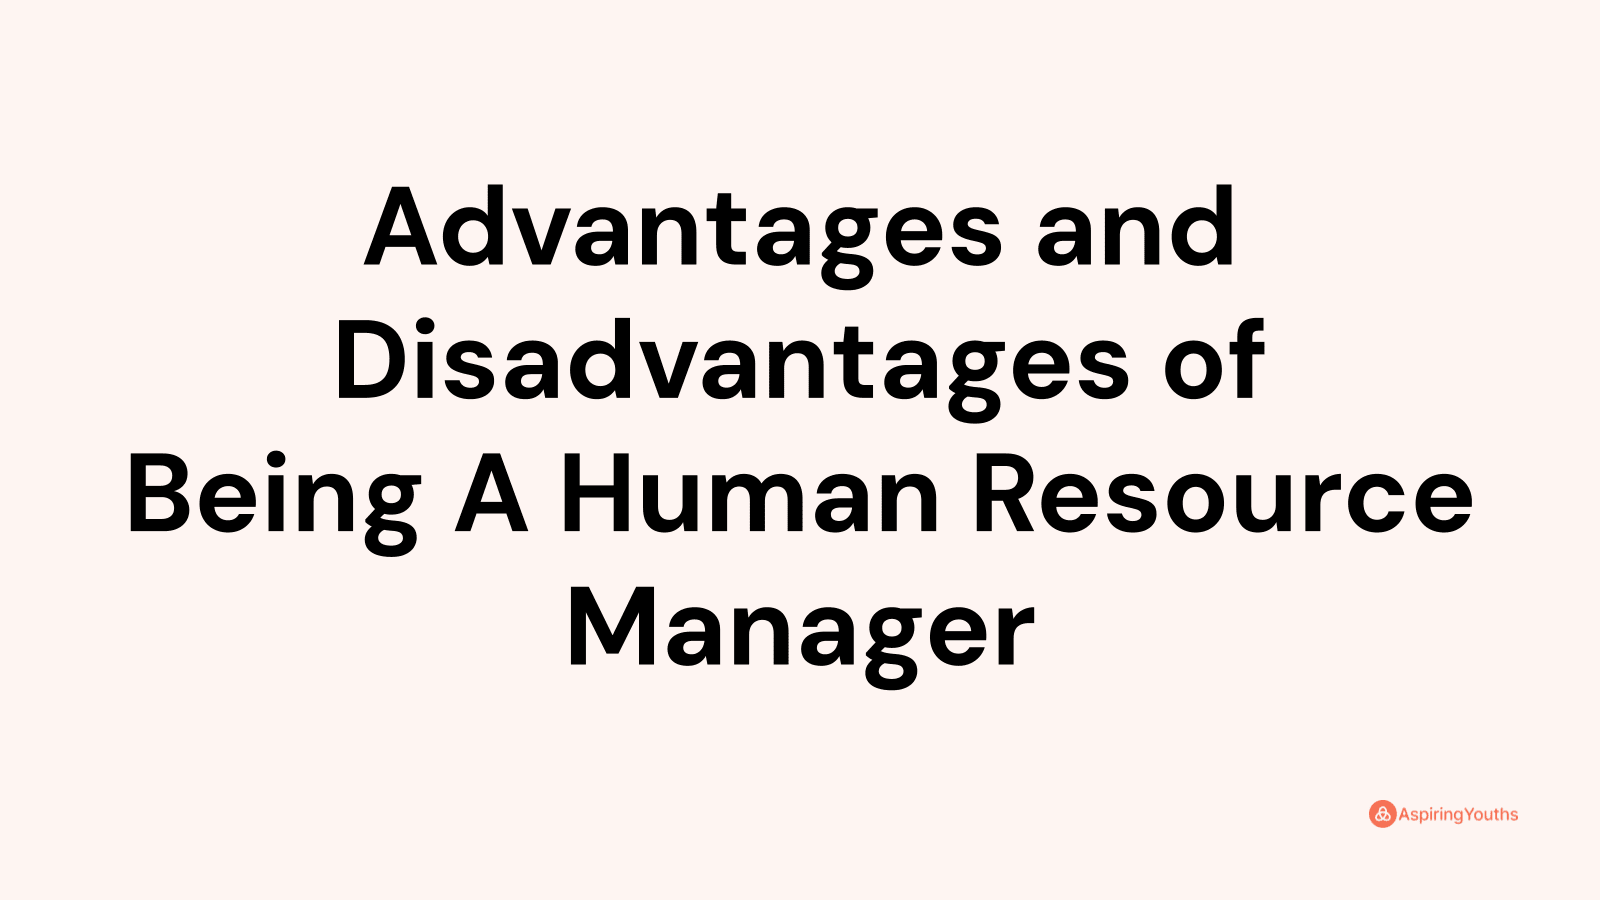 Advantages and disadvantages of Being A Human Resource Manager